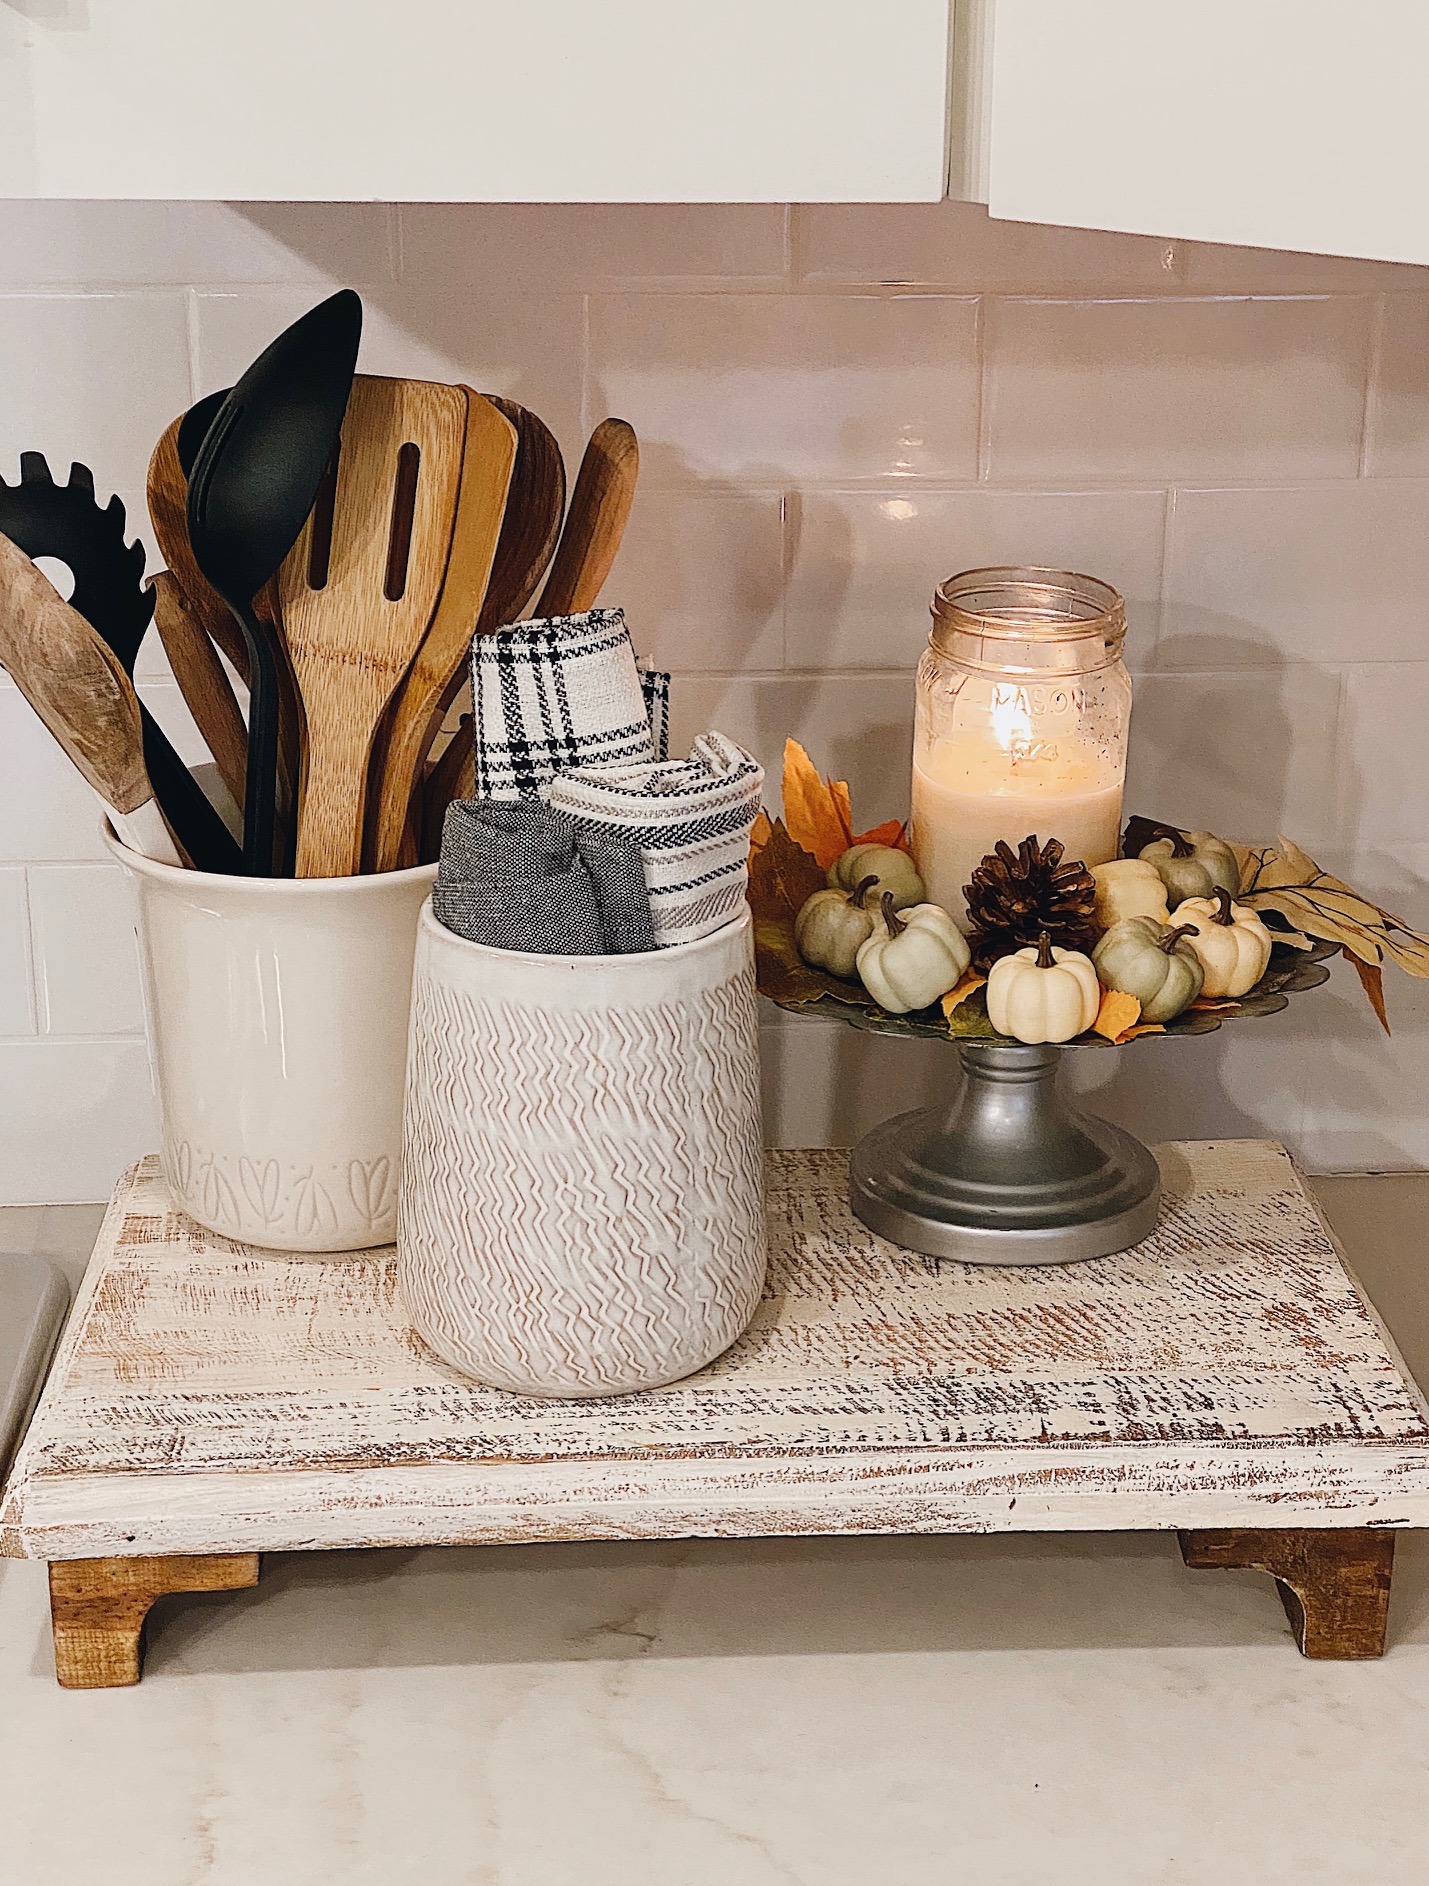 5 Cozy Farmhouse Kitchen Decor Ideas for Fall featured by top AL home decor blogger, She Gave It A Go